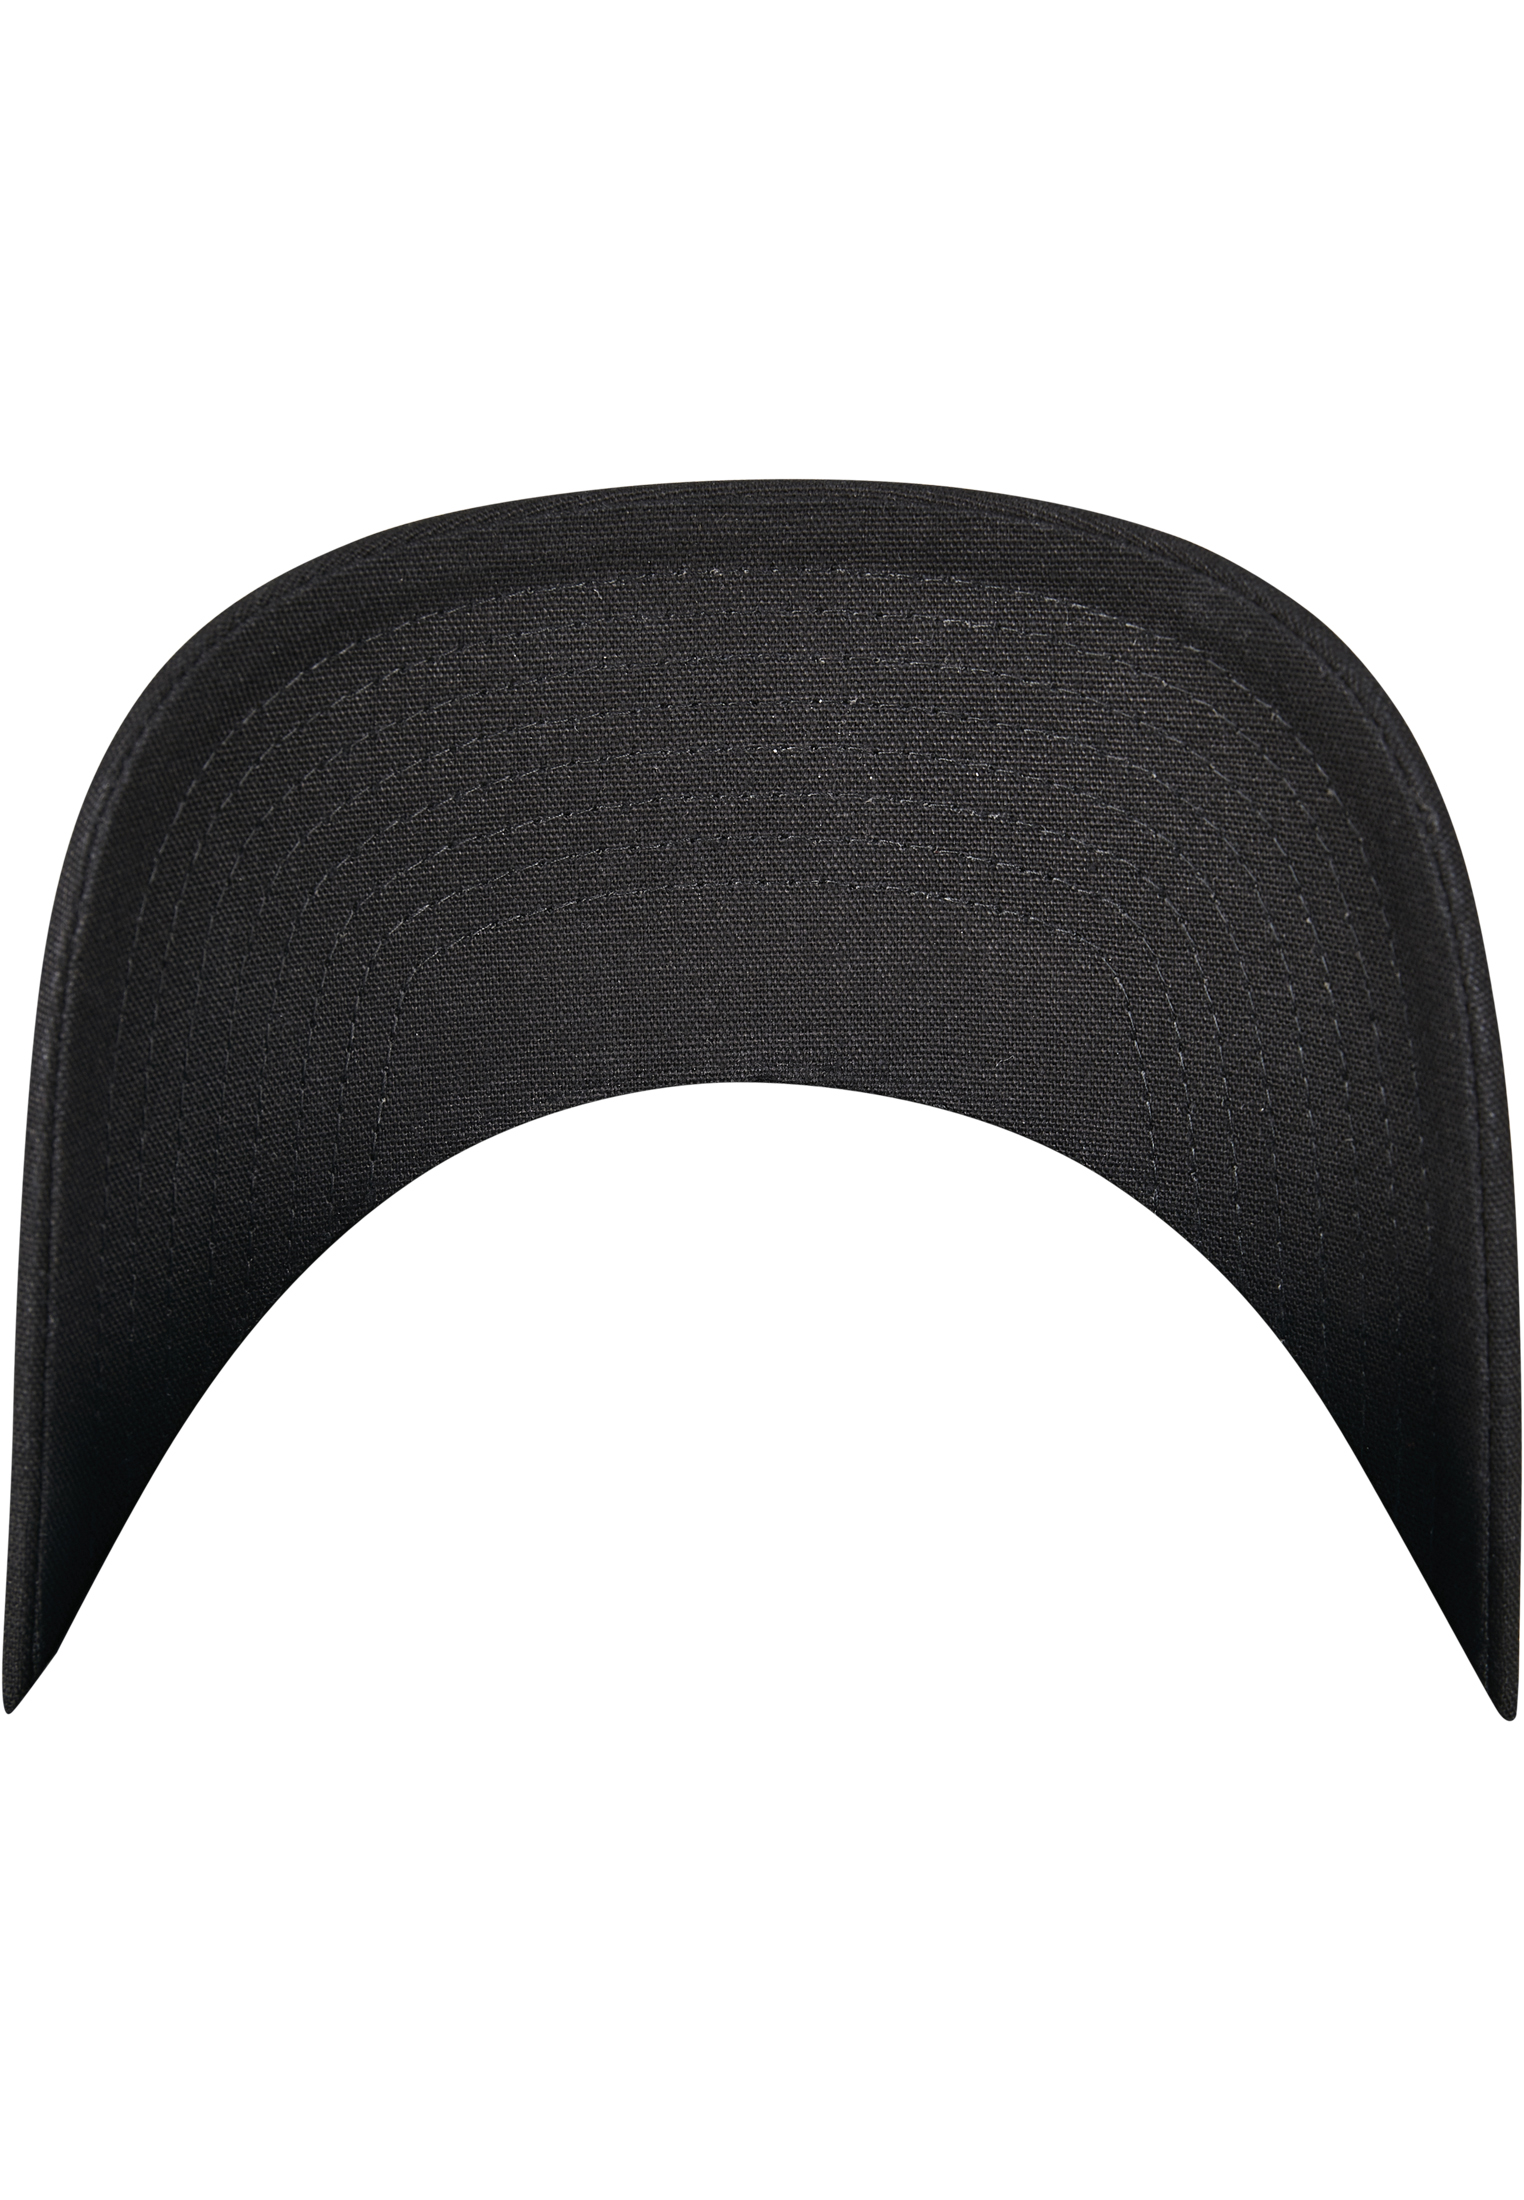 6-Panel Metal Curved Snap-7708MS